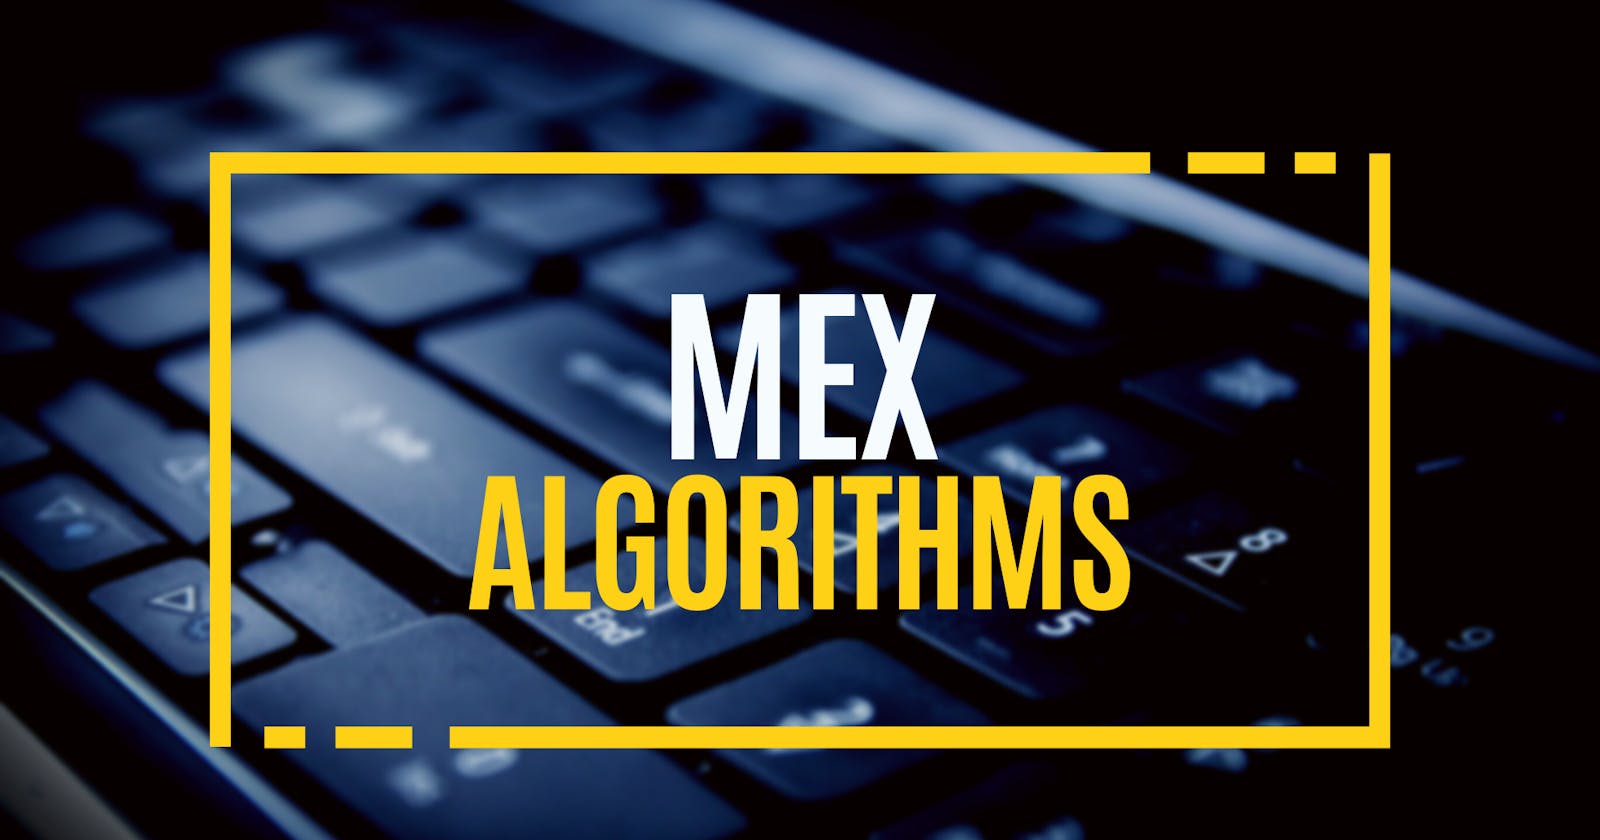 3 Approaches to Mex Algorithms